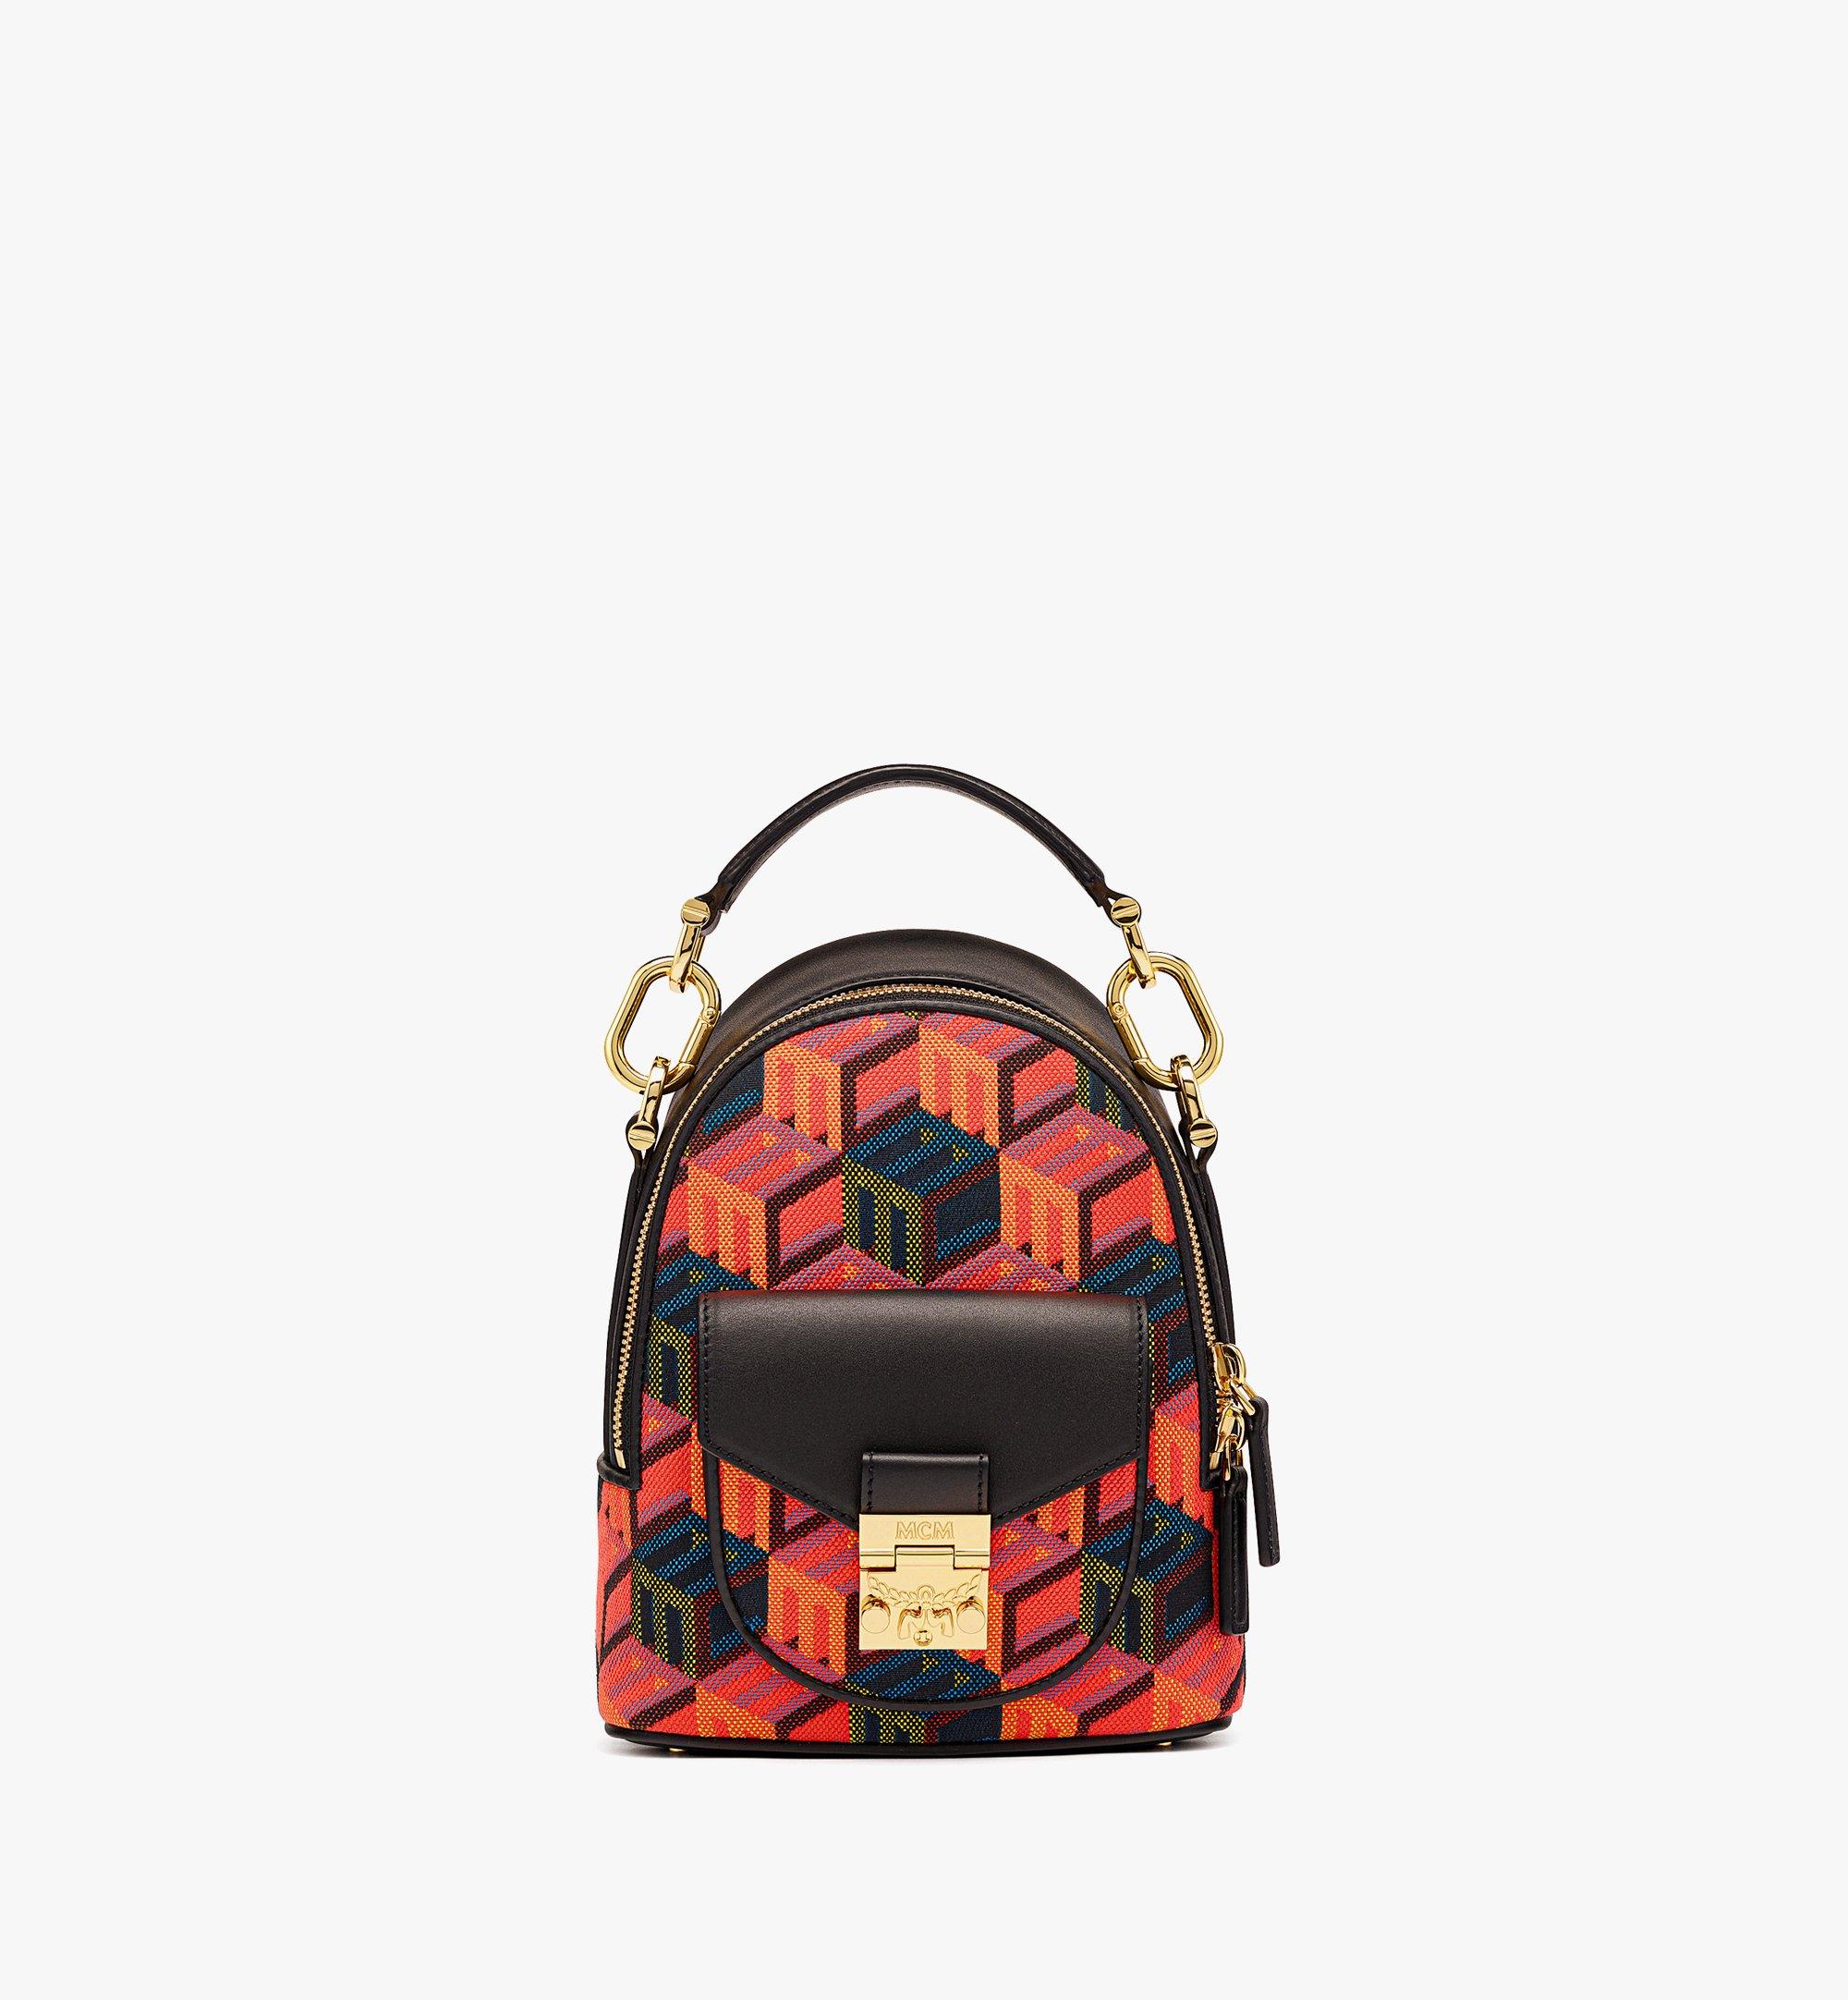 MCM Tracy Backpack in Cubic Monogram Jacquard Multi MWKCSCK01MT001 Alternate View 1